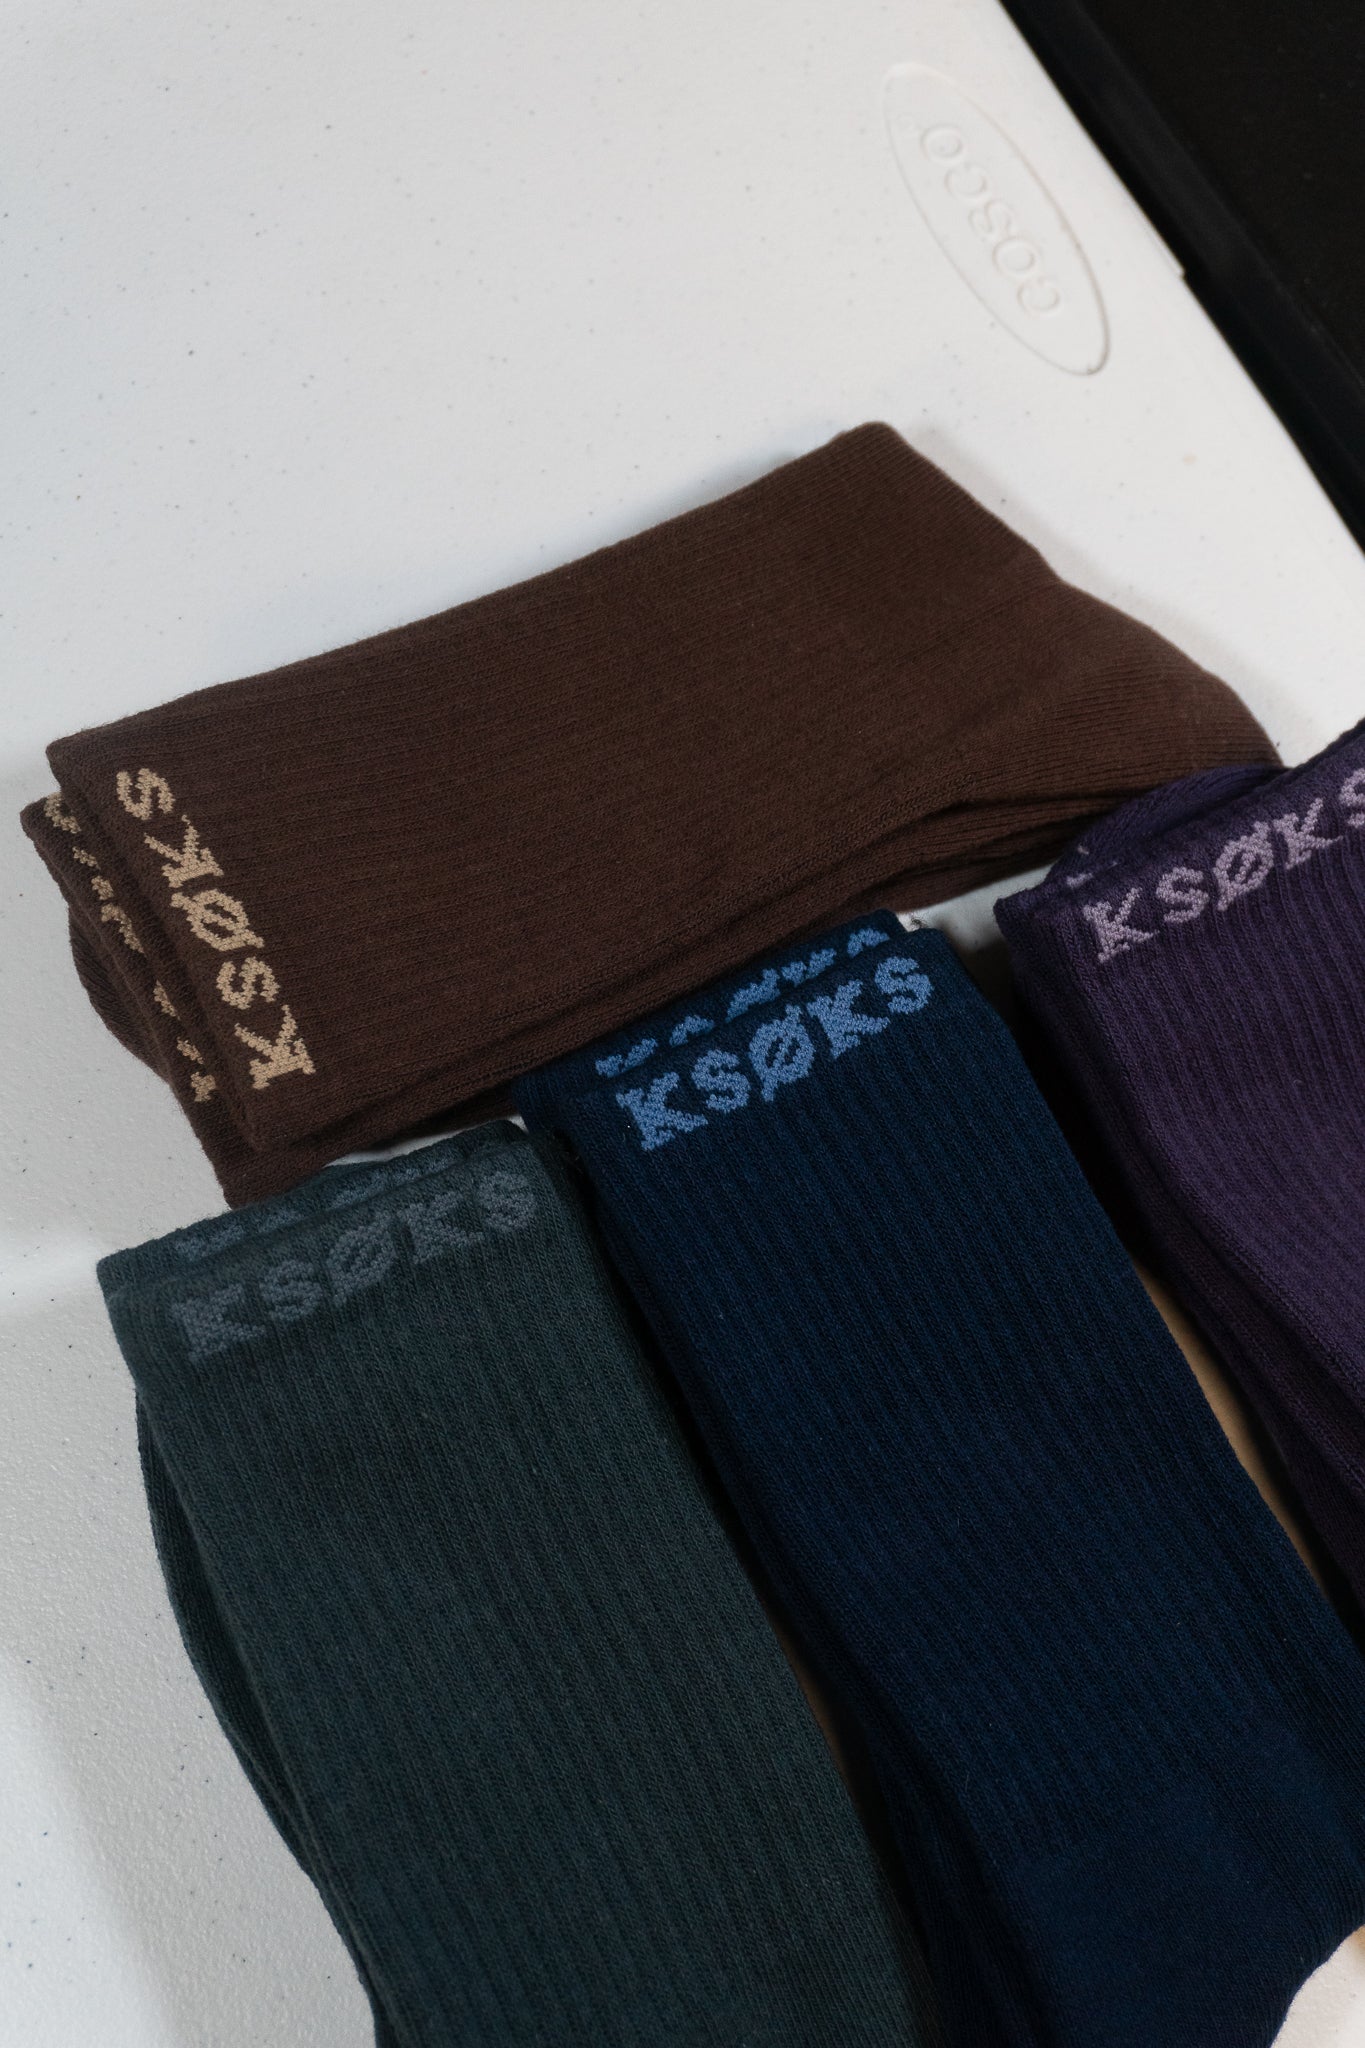 Winter themed 100% cotton custom crew socks. Thick material, cozy and comfortable.